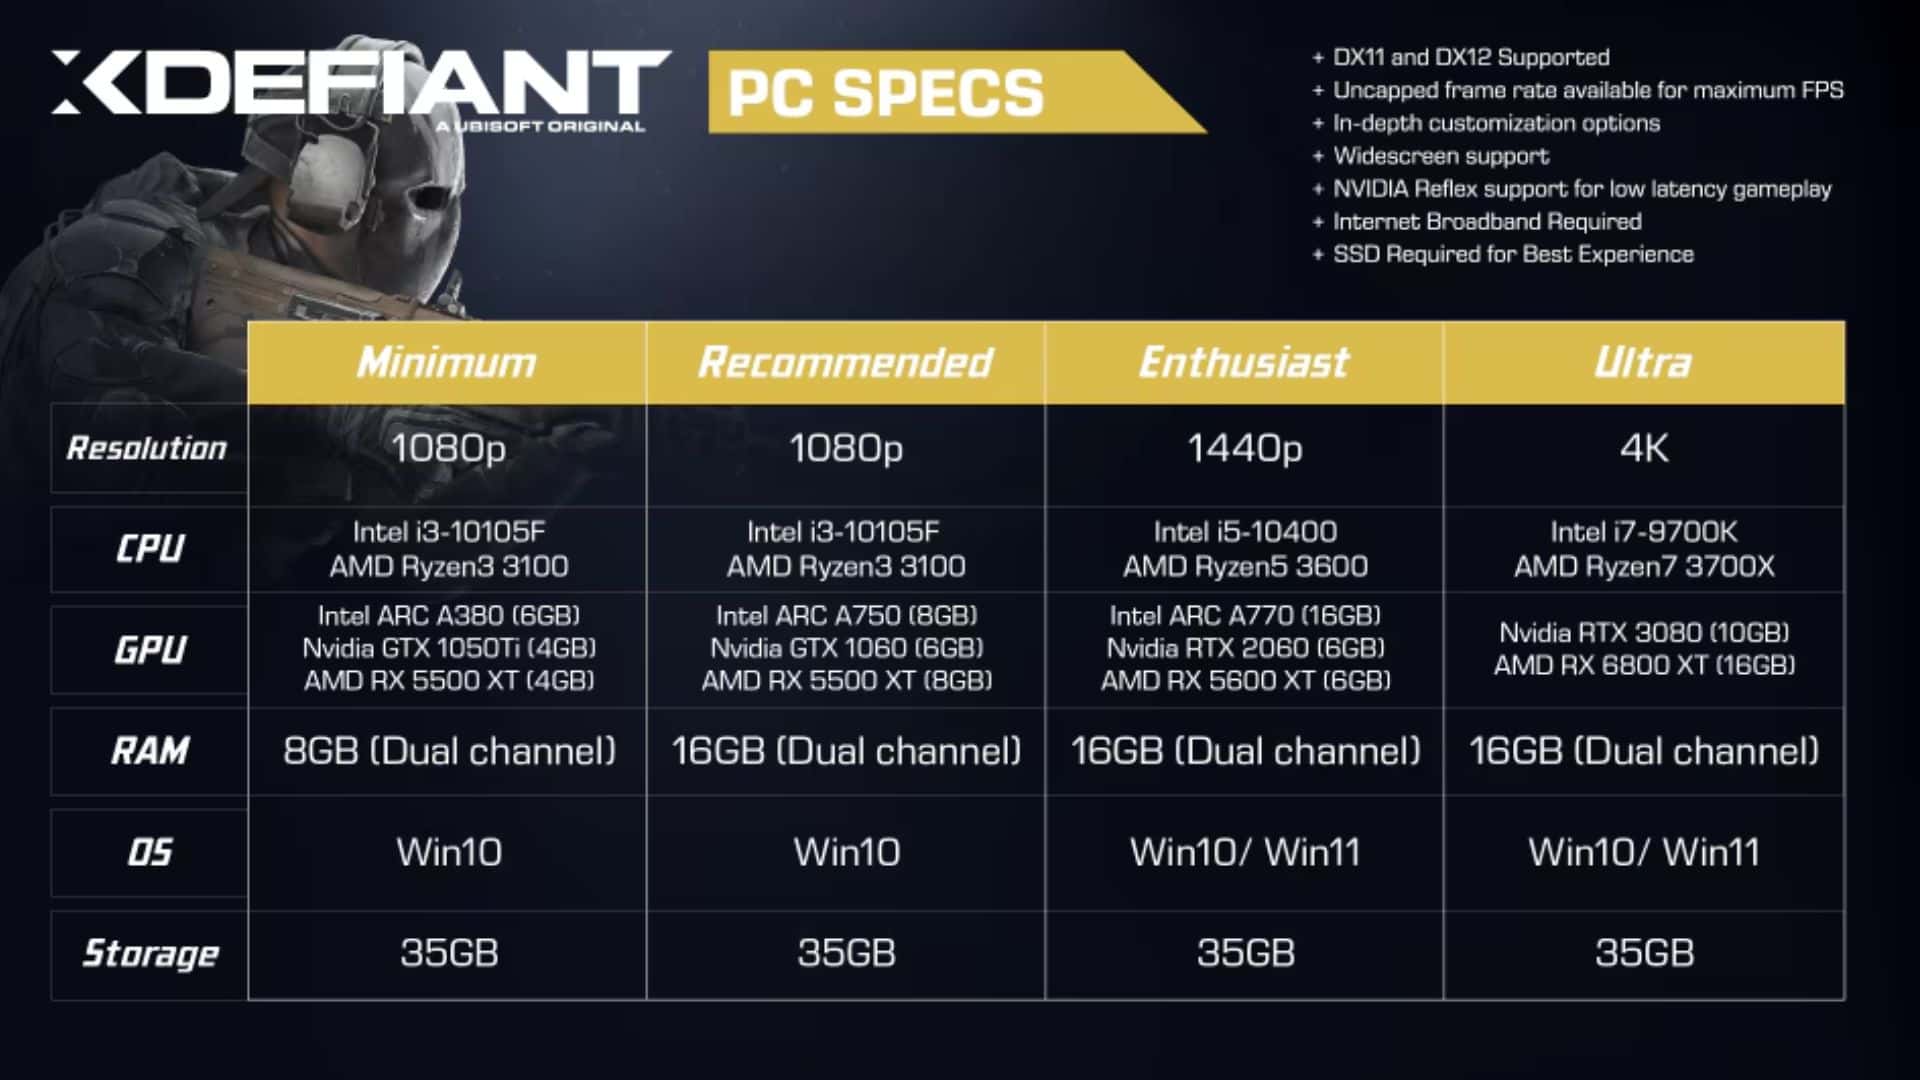 The Finals PC system requirements